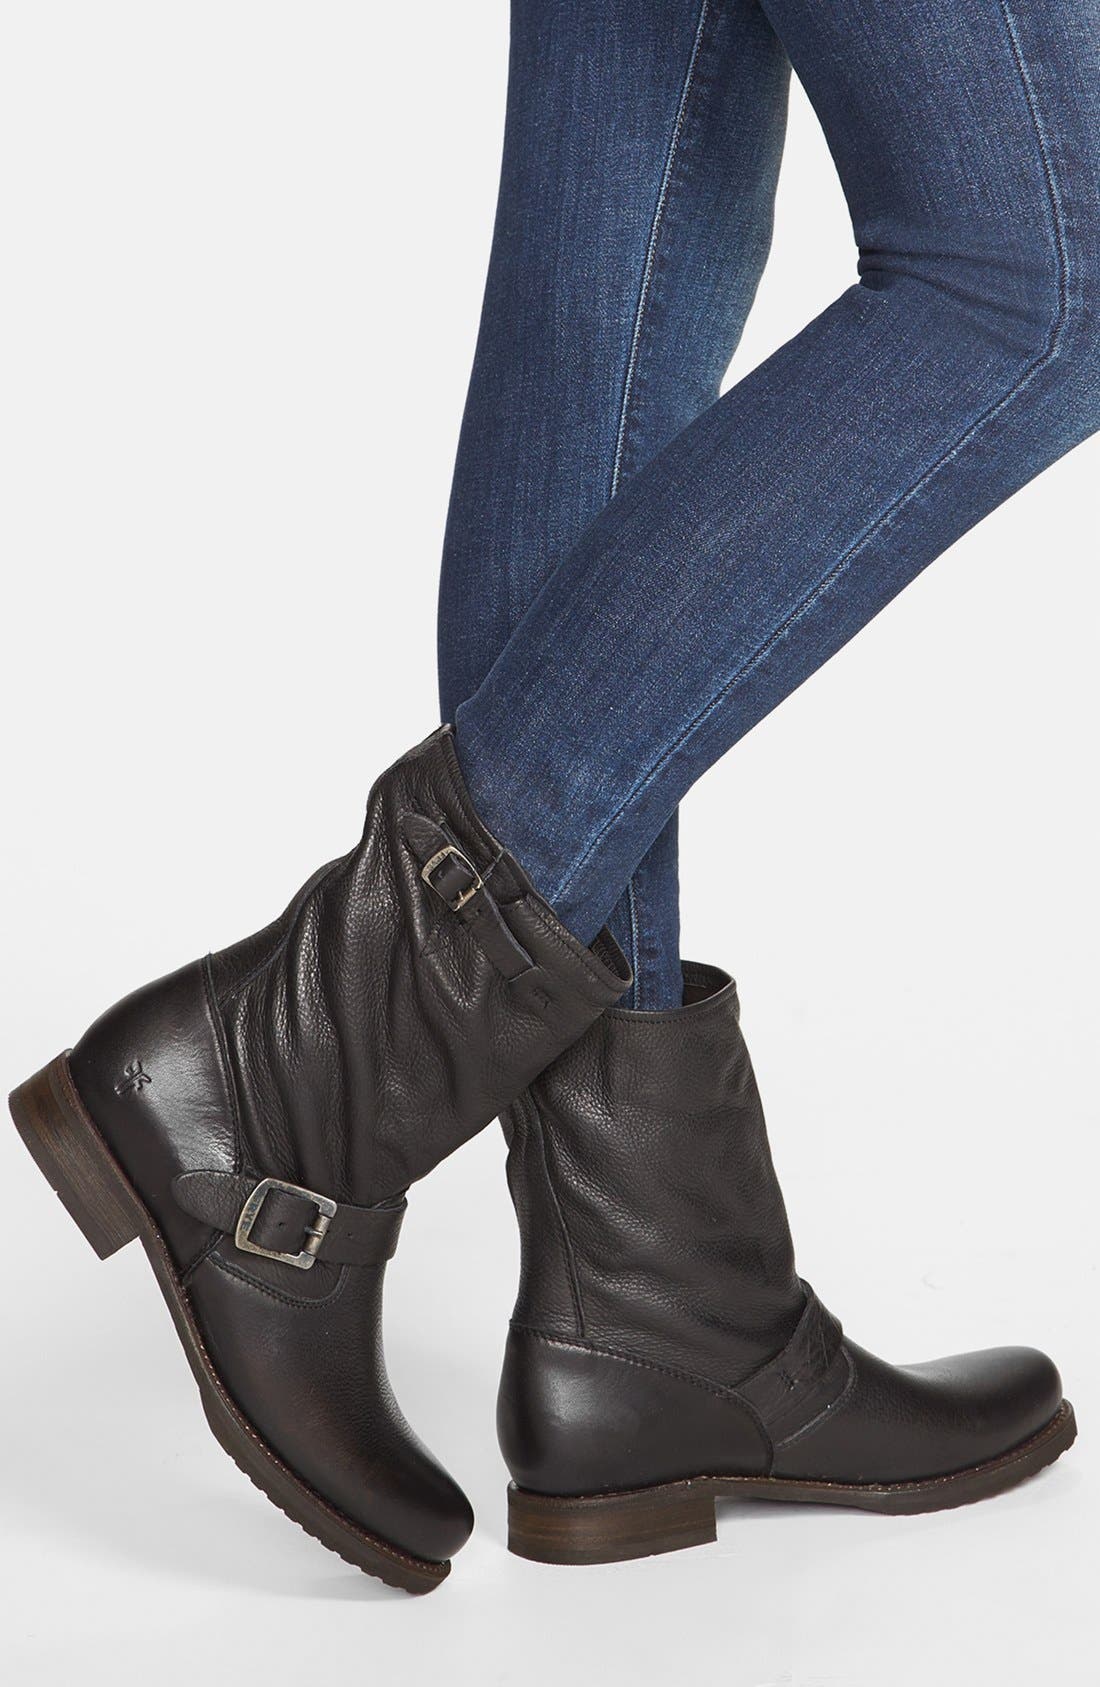 slouch boots fall 219